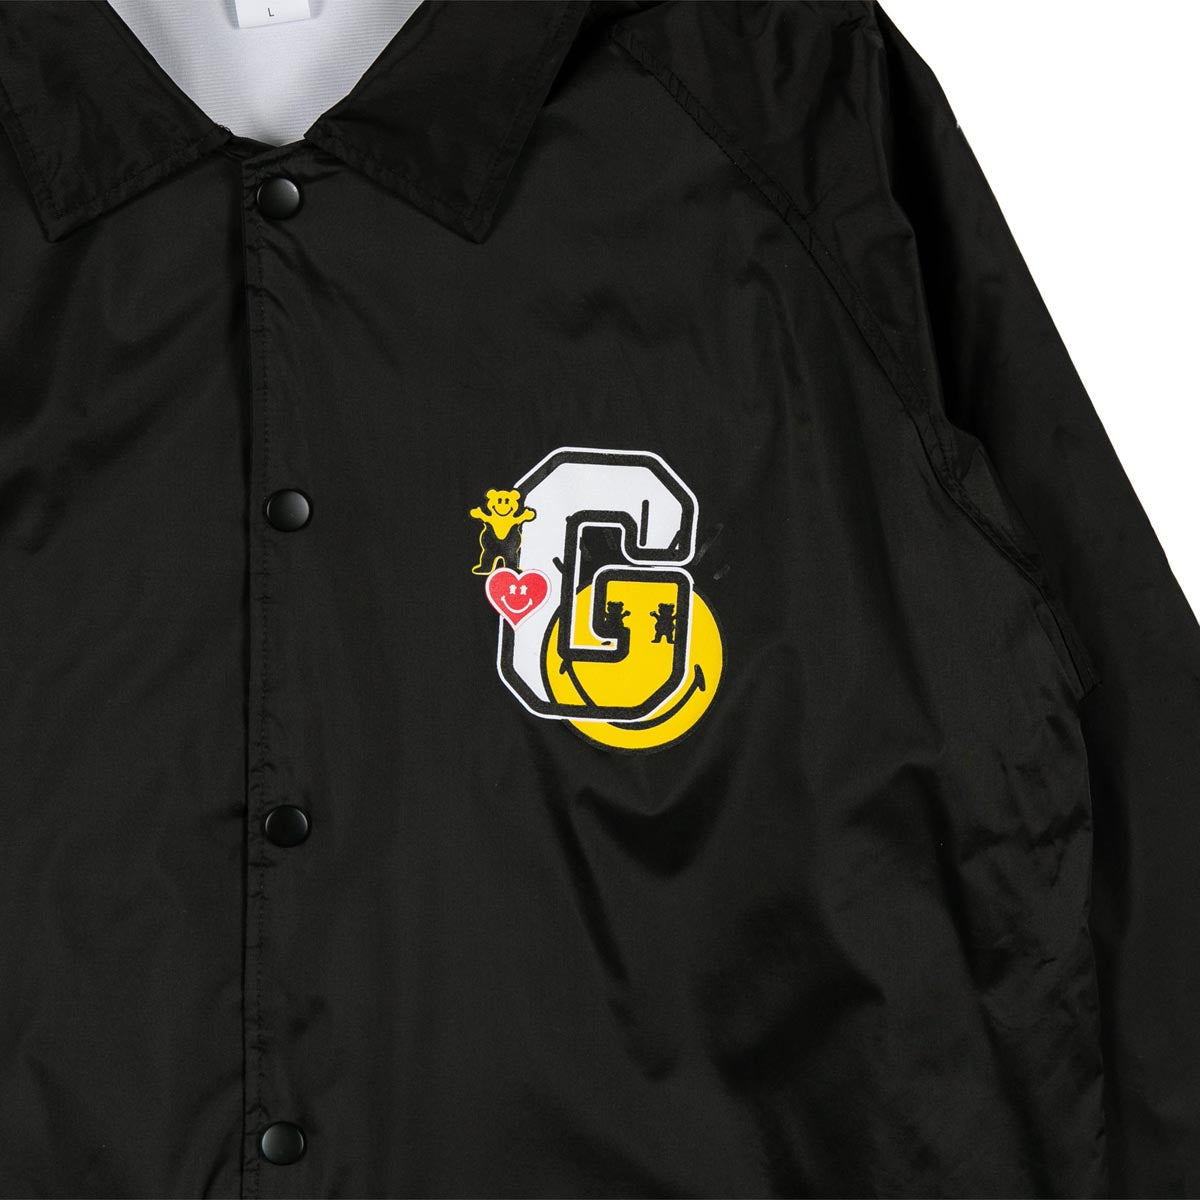 Grizzly x Smiley World Coach Jacket - Black image 3